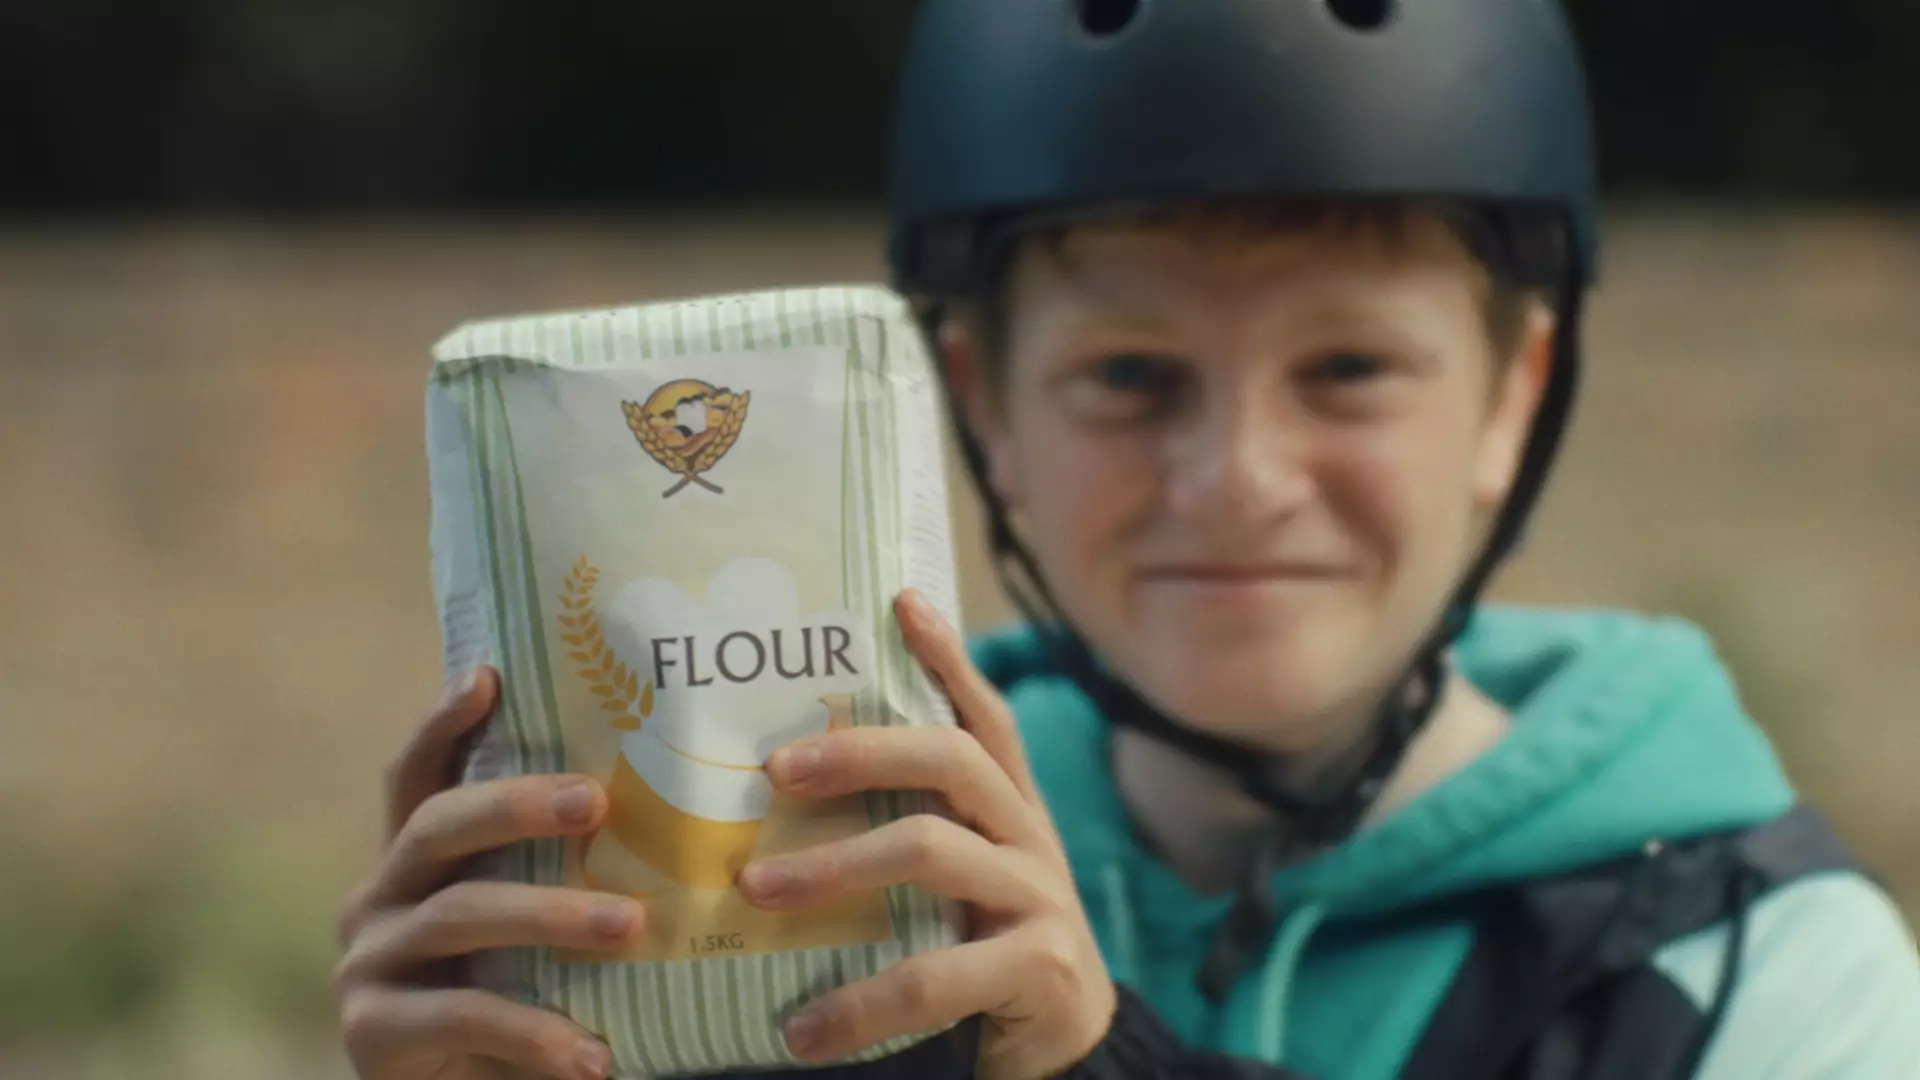 The teaser trailer light-heartedly depicts the nation's pursuit of flour (